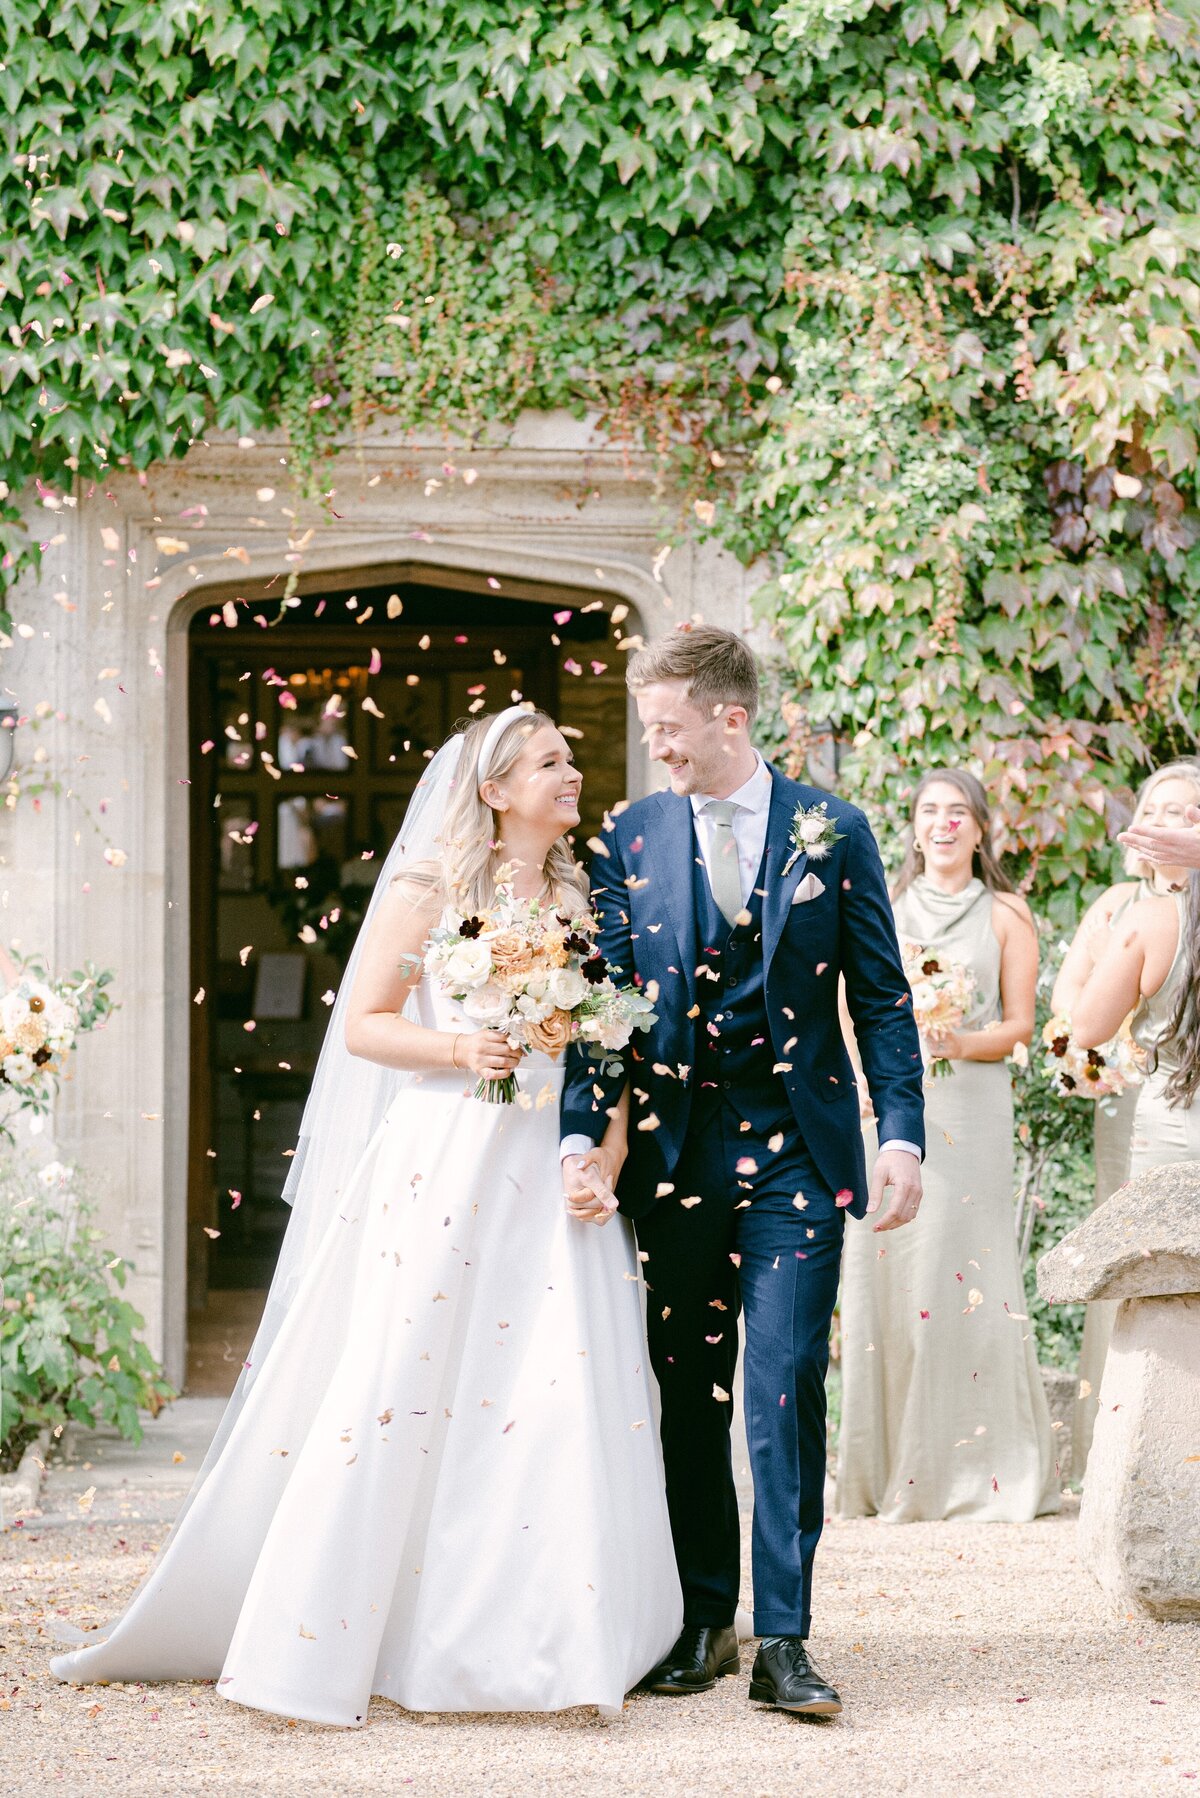 Surrey Wedding Photographer, Bride and groom walking down the middle of their guests who are throwing confetti over them at Hyde house in the cotswolds